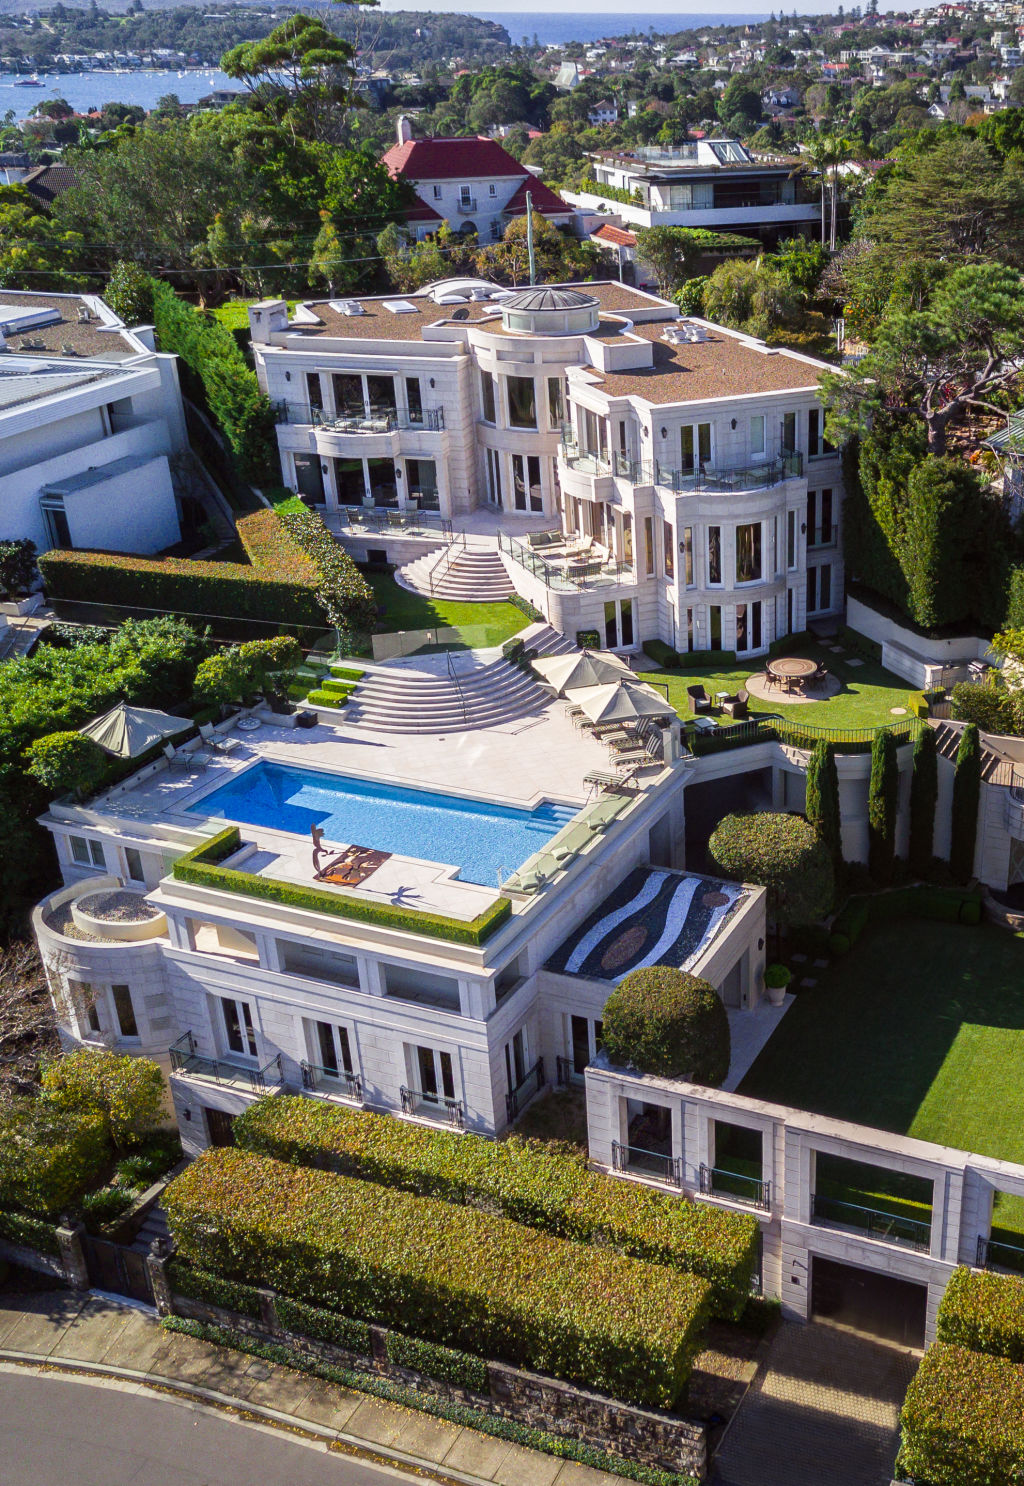 Eight of the best high-end homes for sale right now